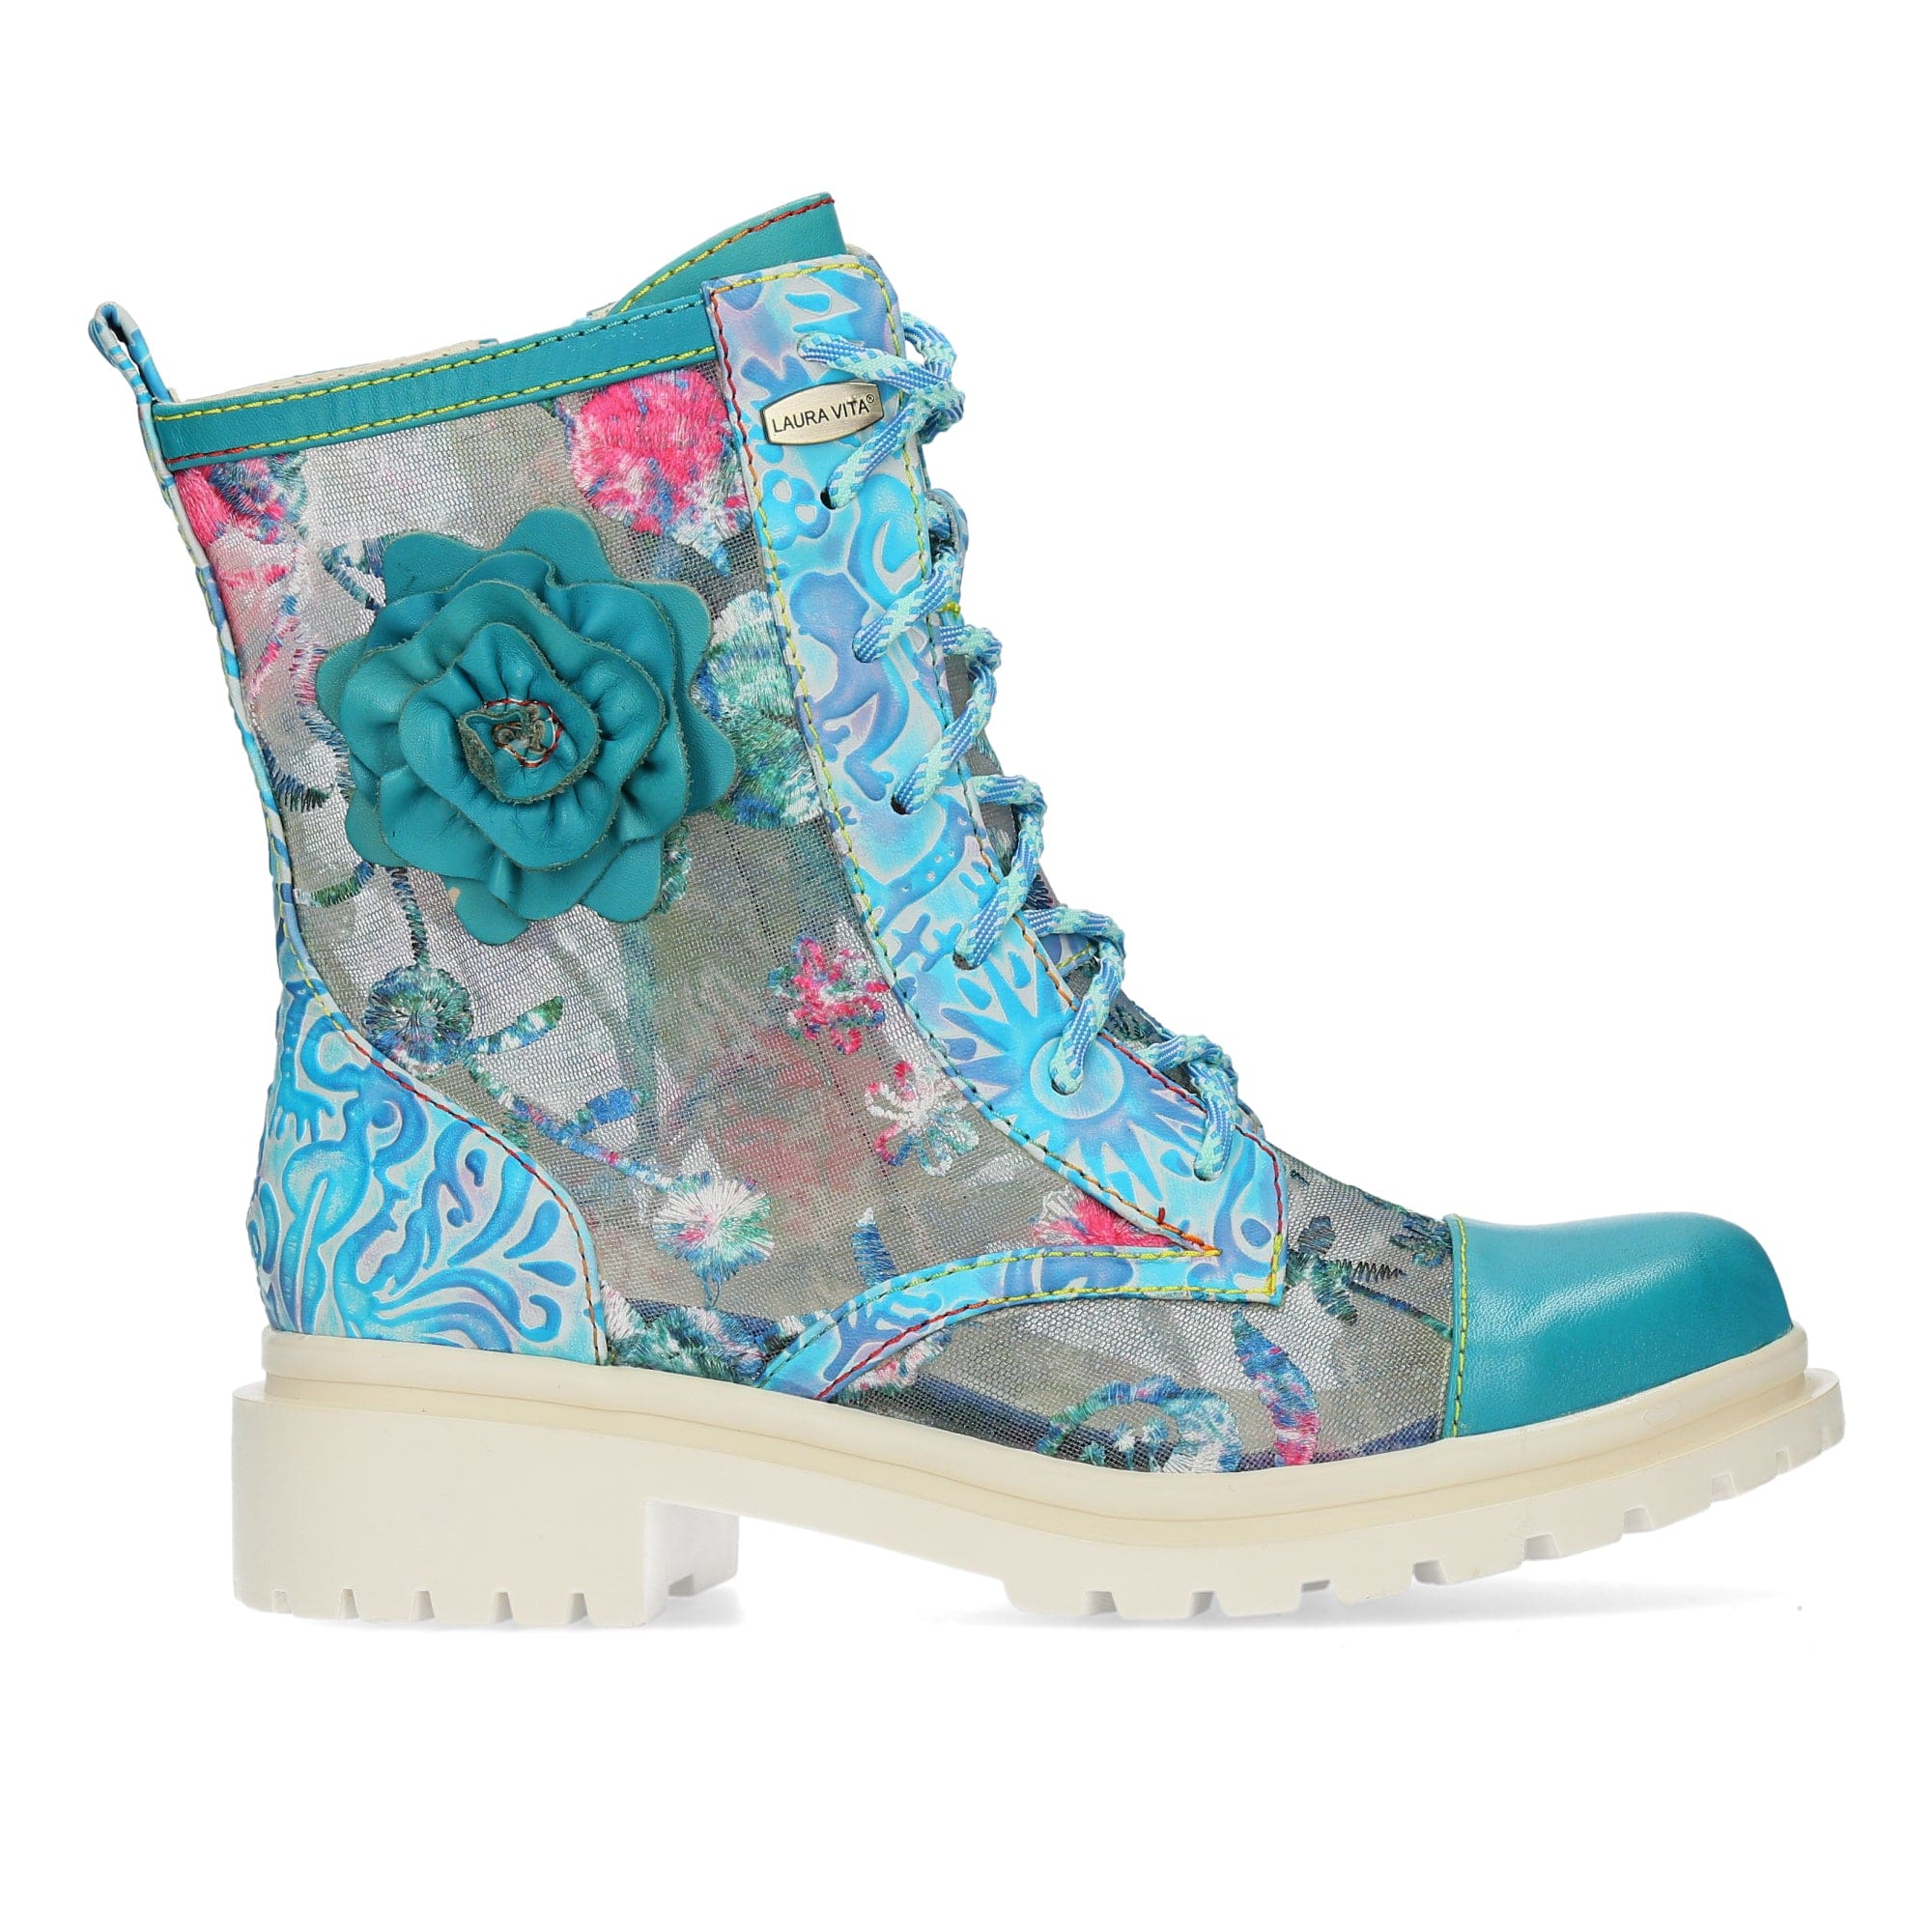 Chaussure IFCIGO 05 - 35 / Turquoise - Boots